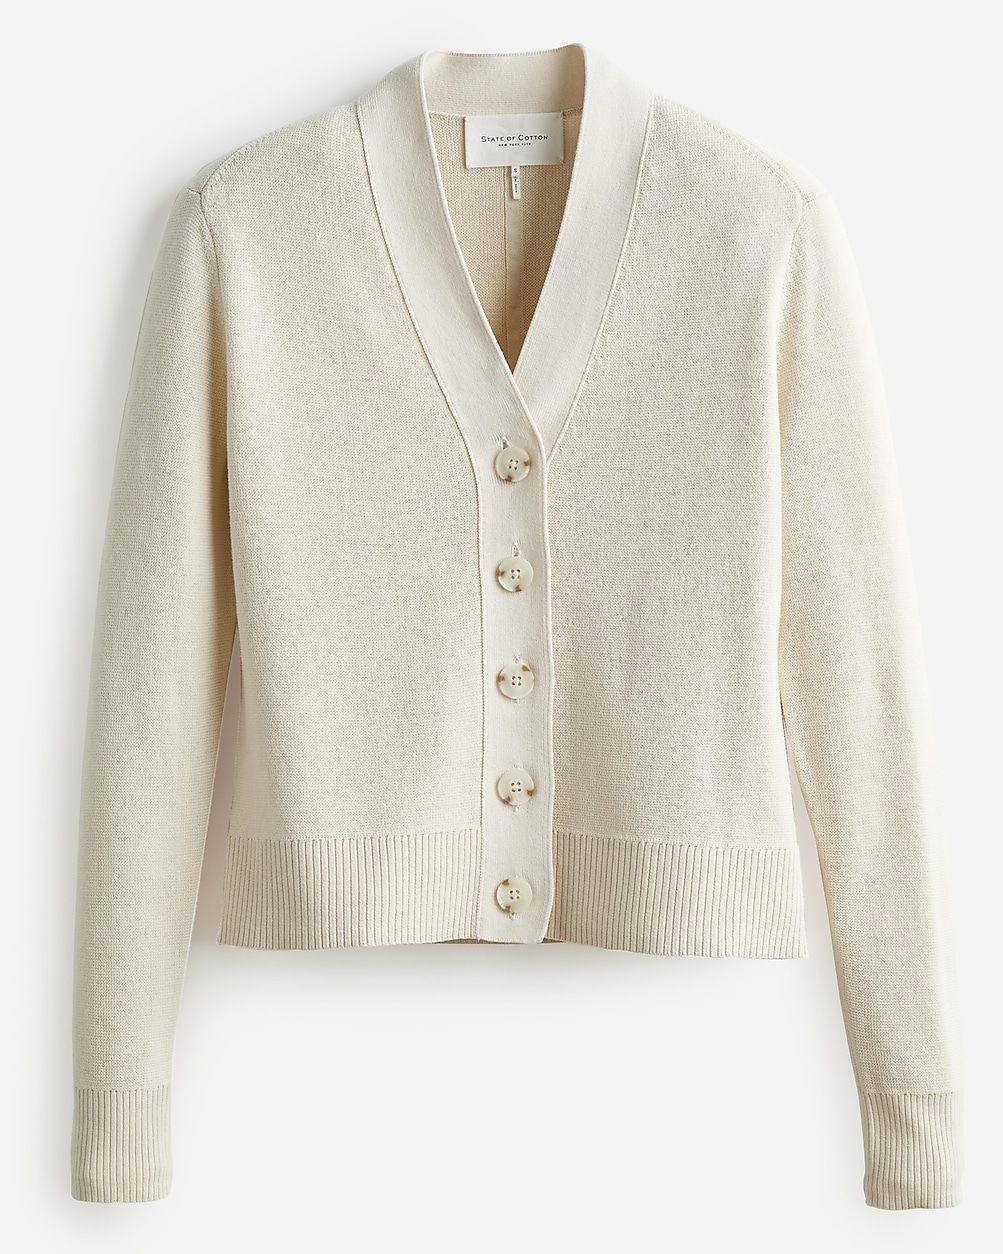 State of Cotton NYC Perry cardigan sweater | J.Crew US